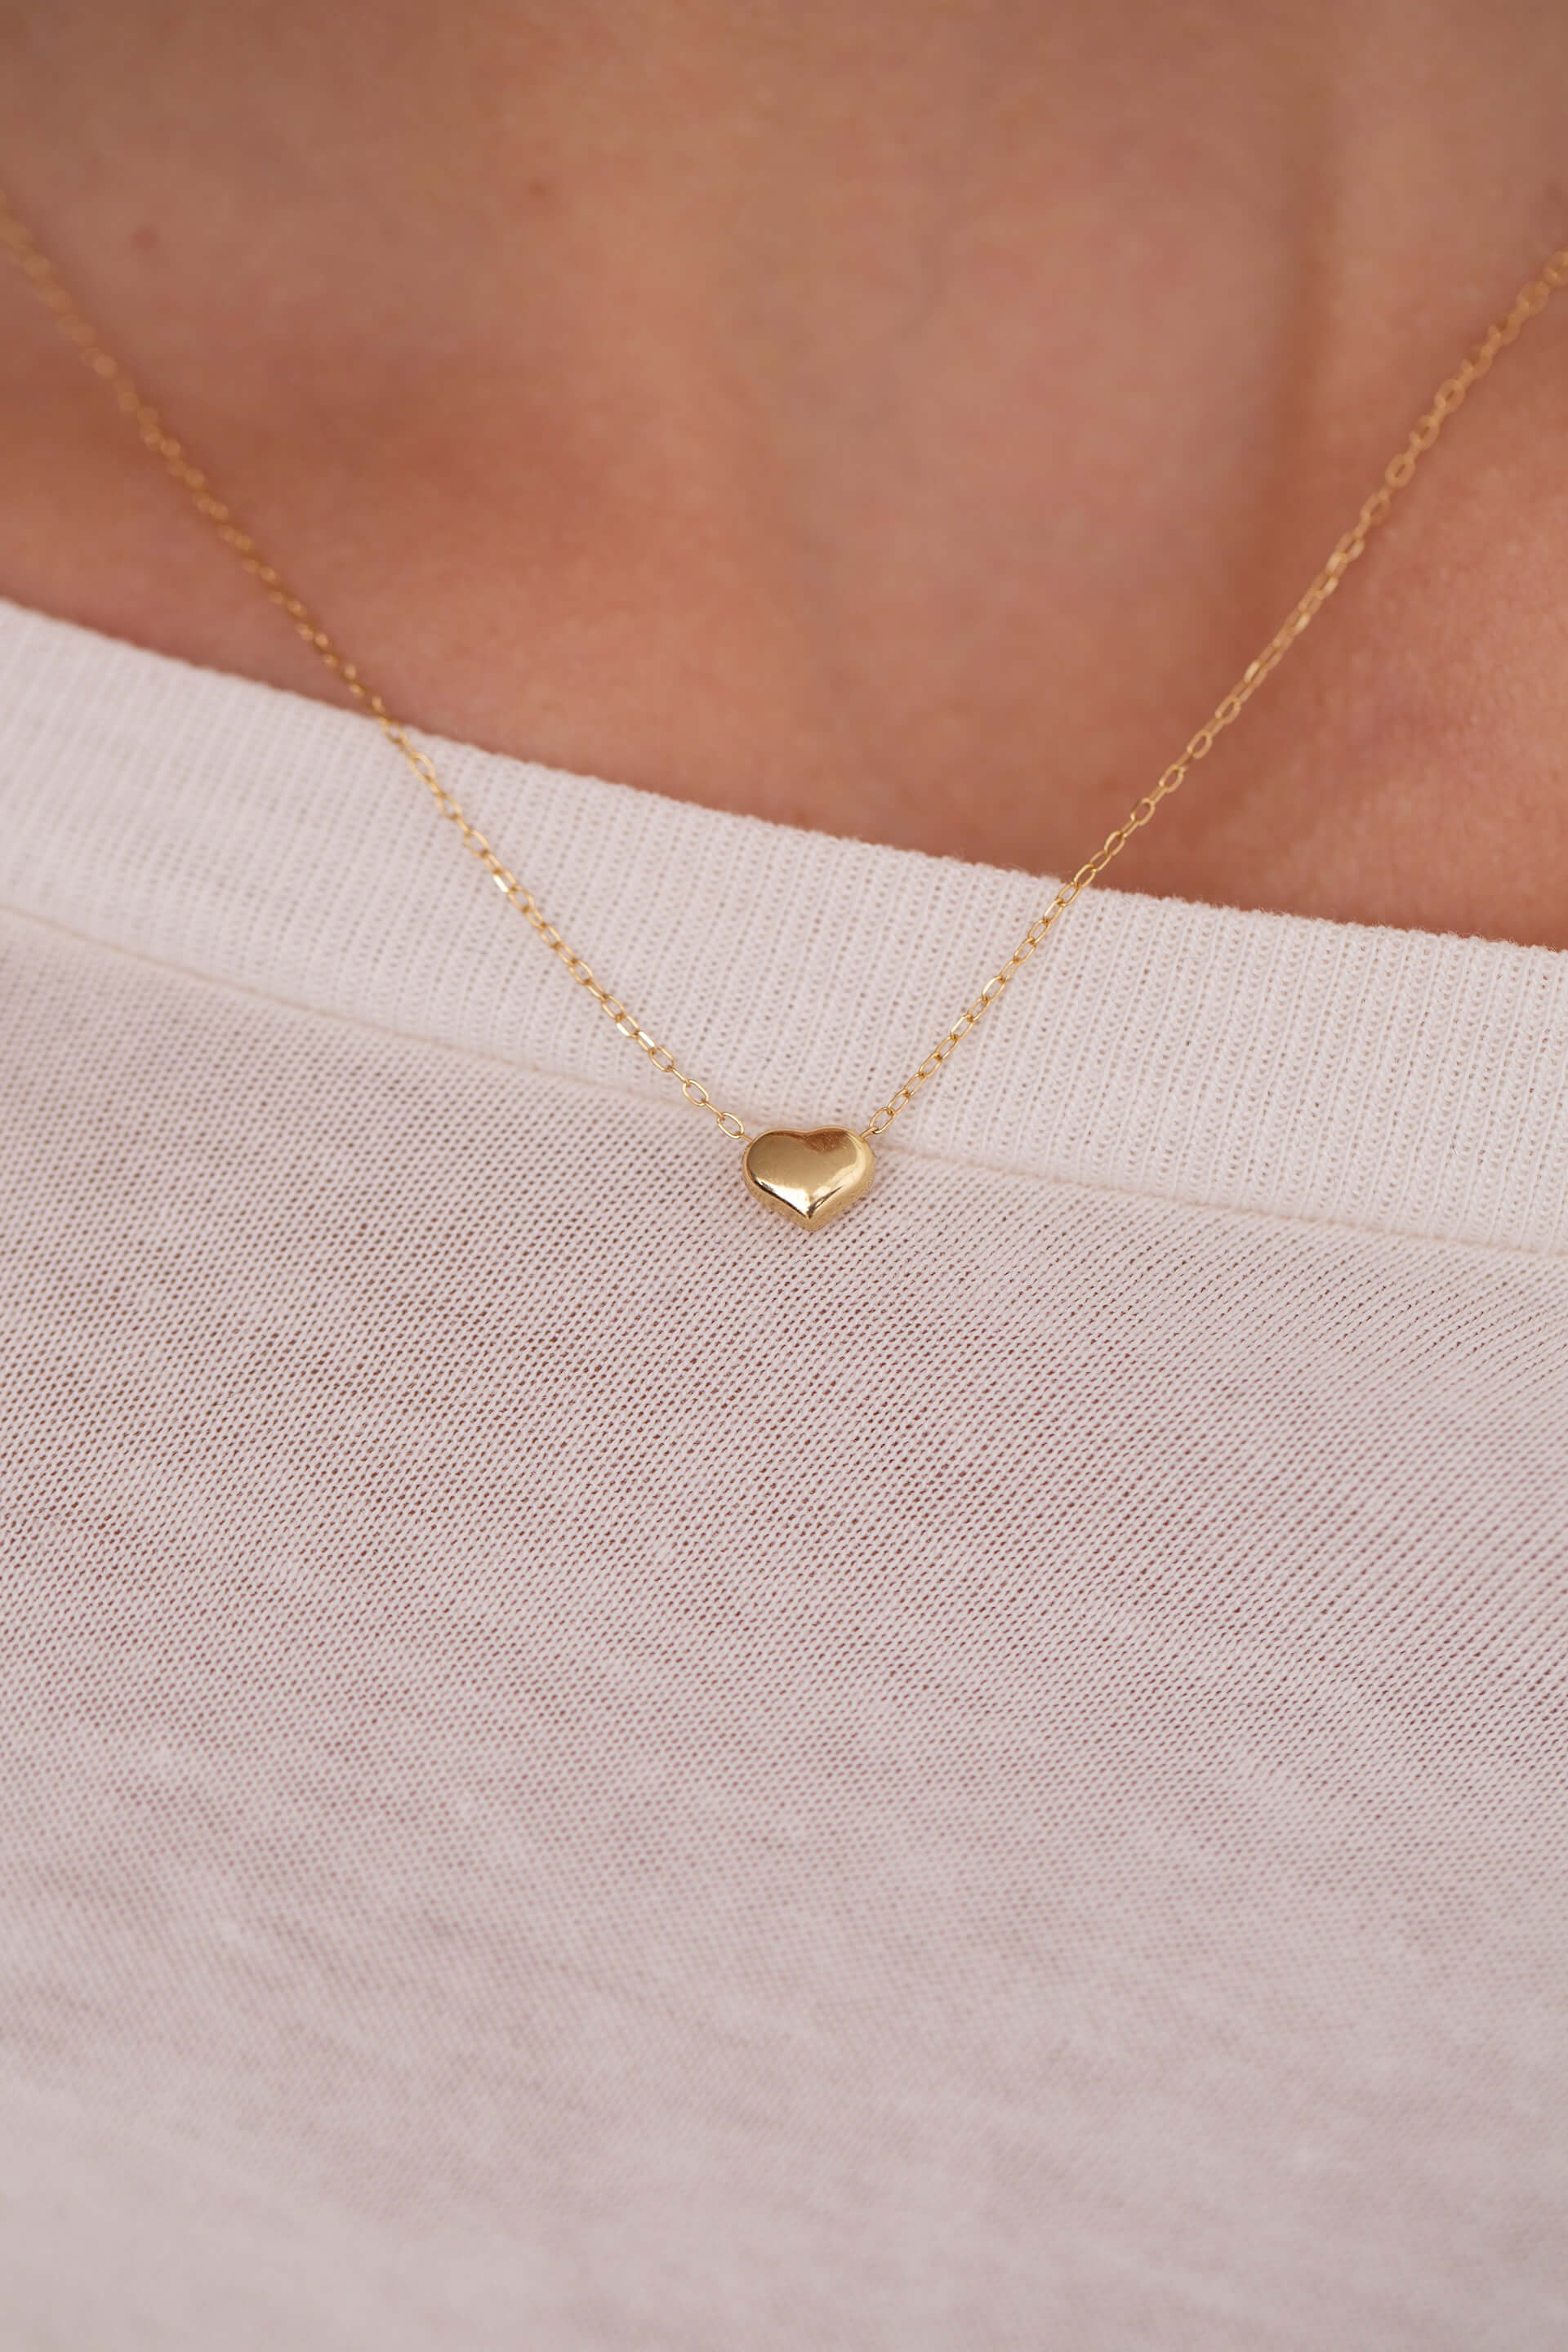 GOLD HEART || NECKLACE